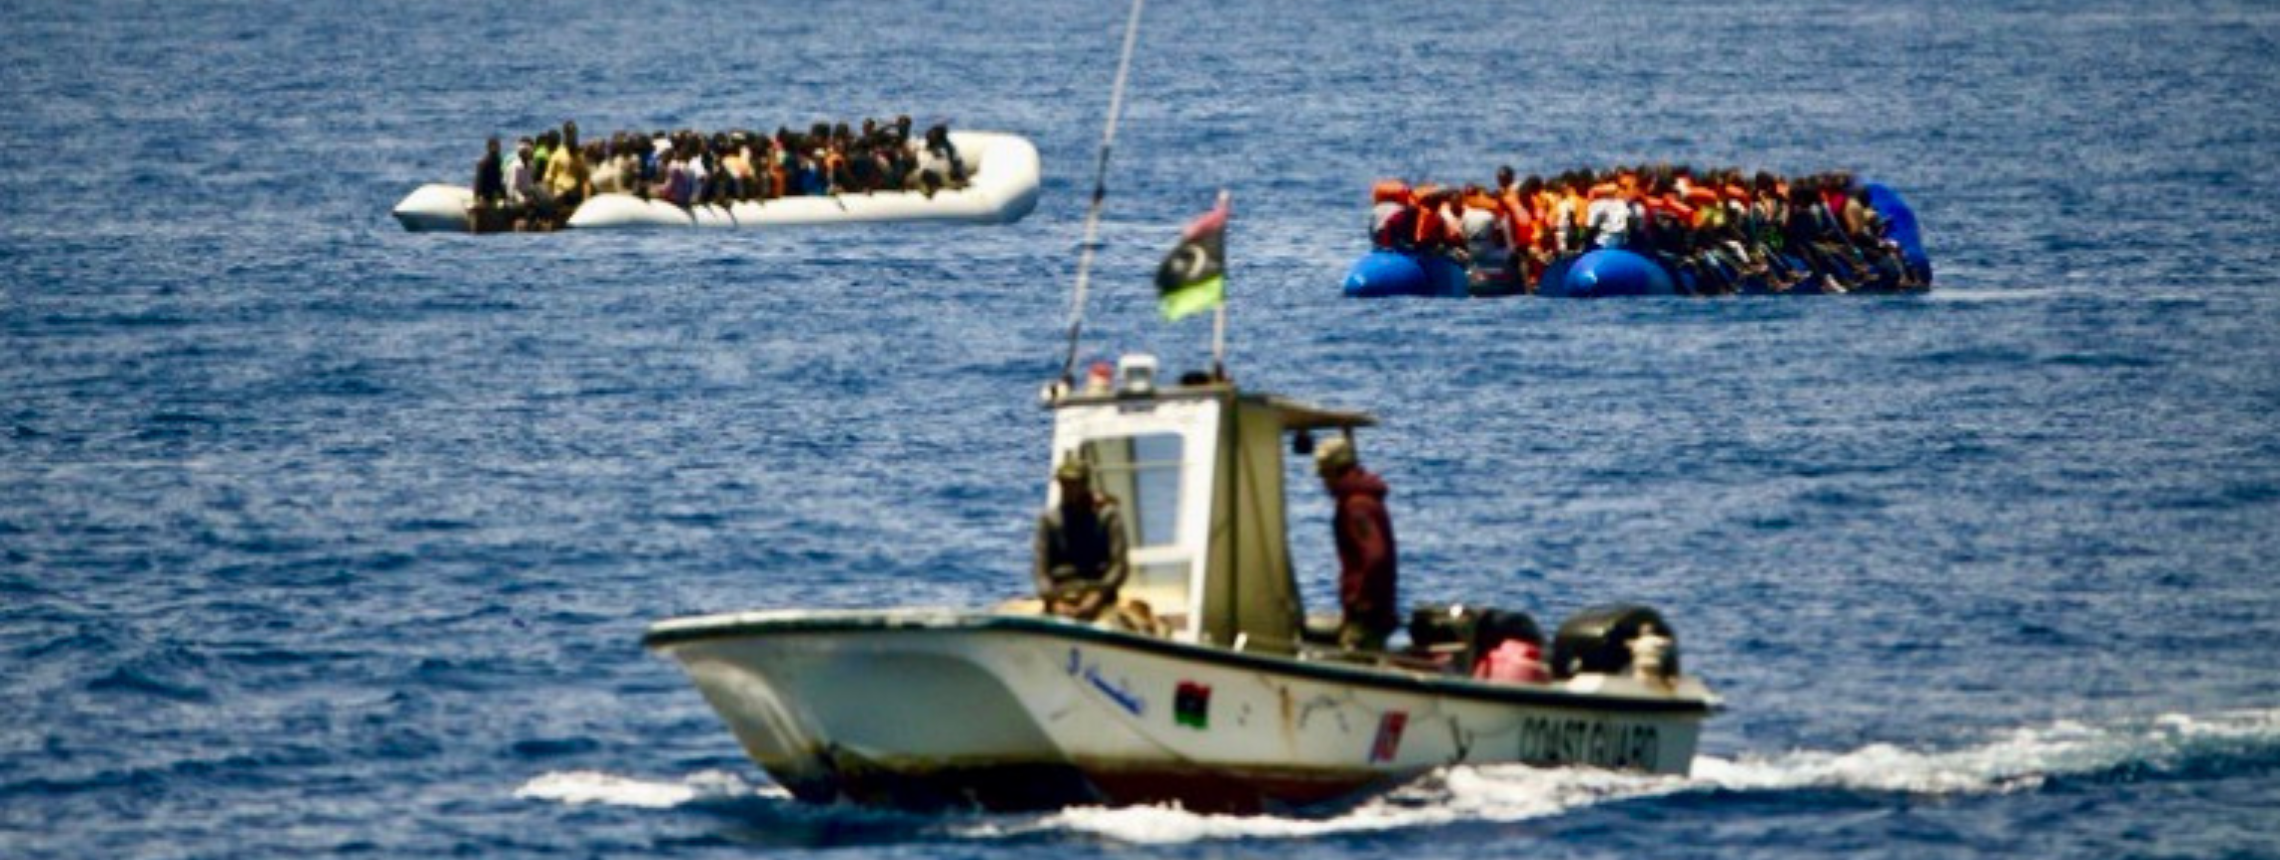 Libya Migrant Security A support boat and 2 rafts filled with people